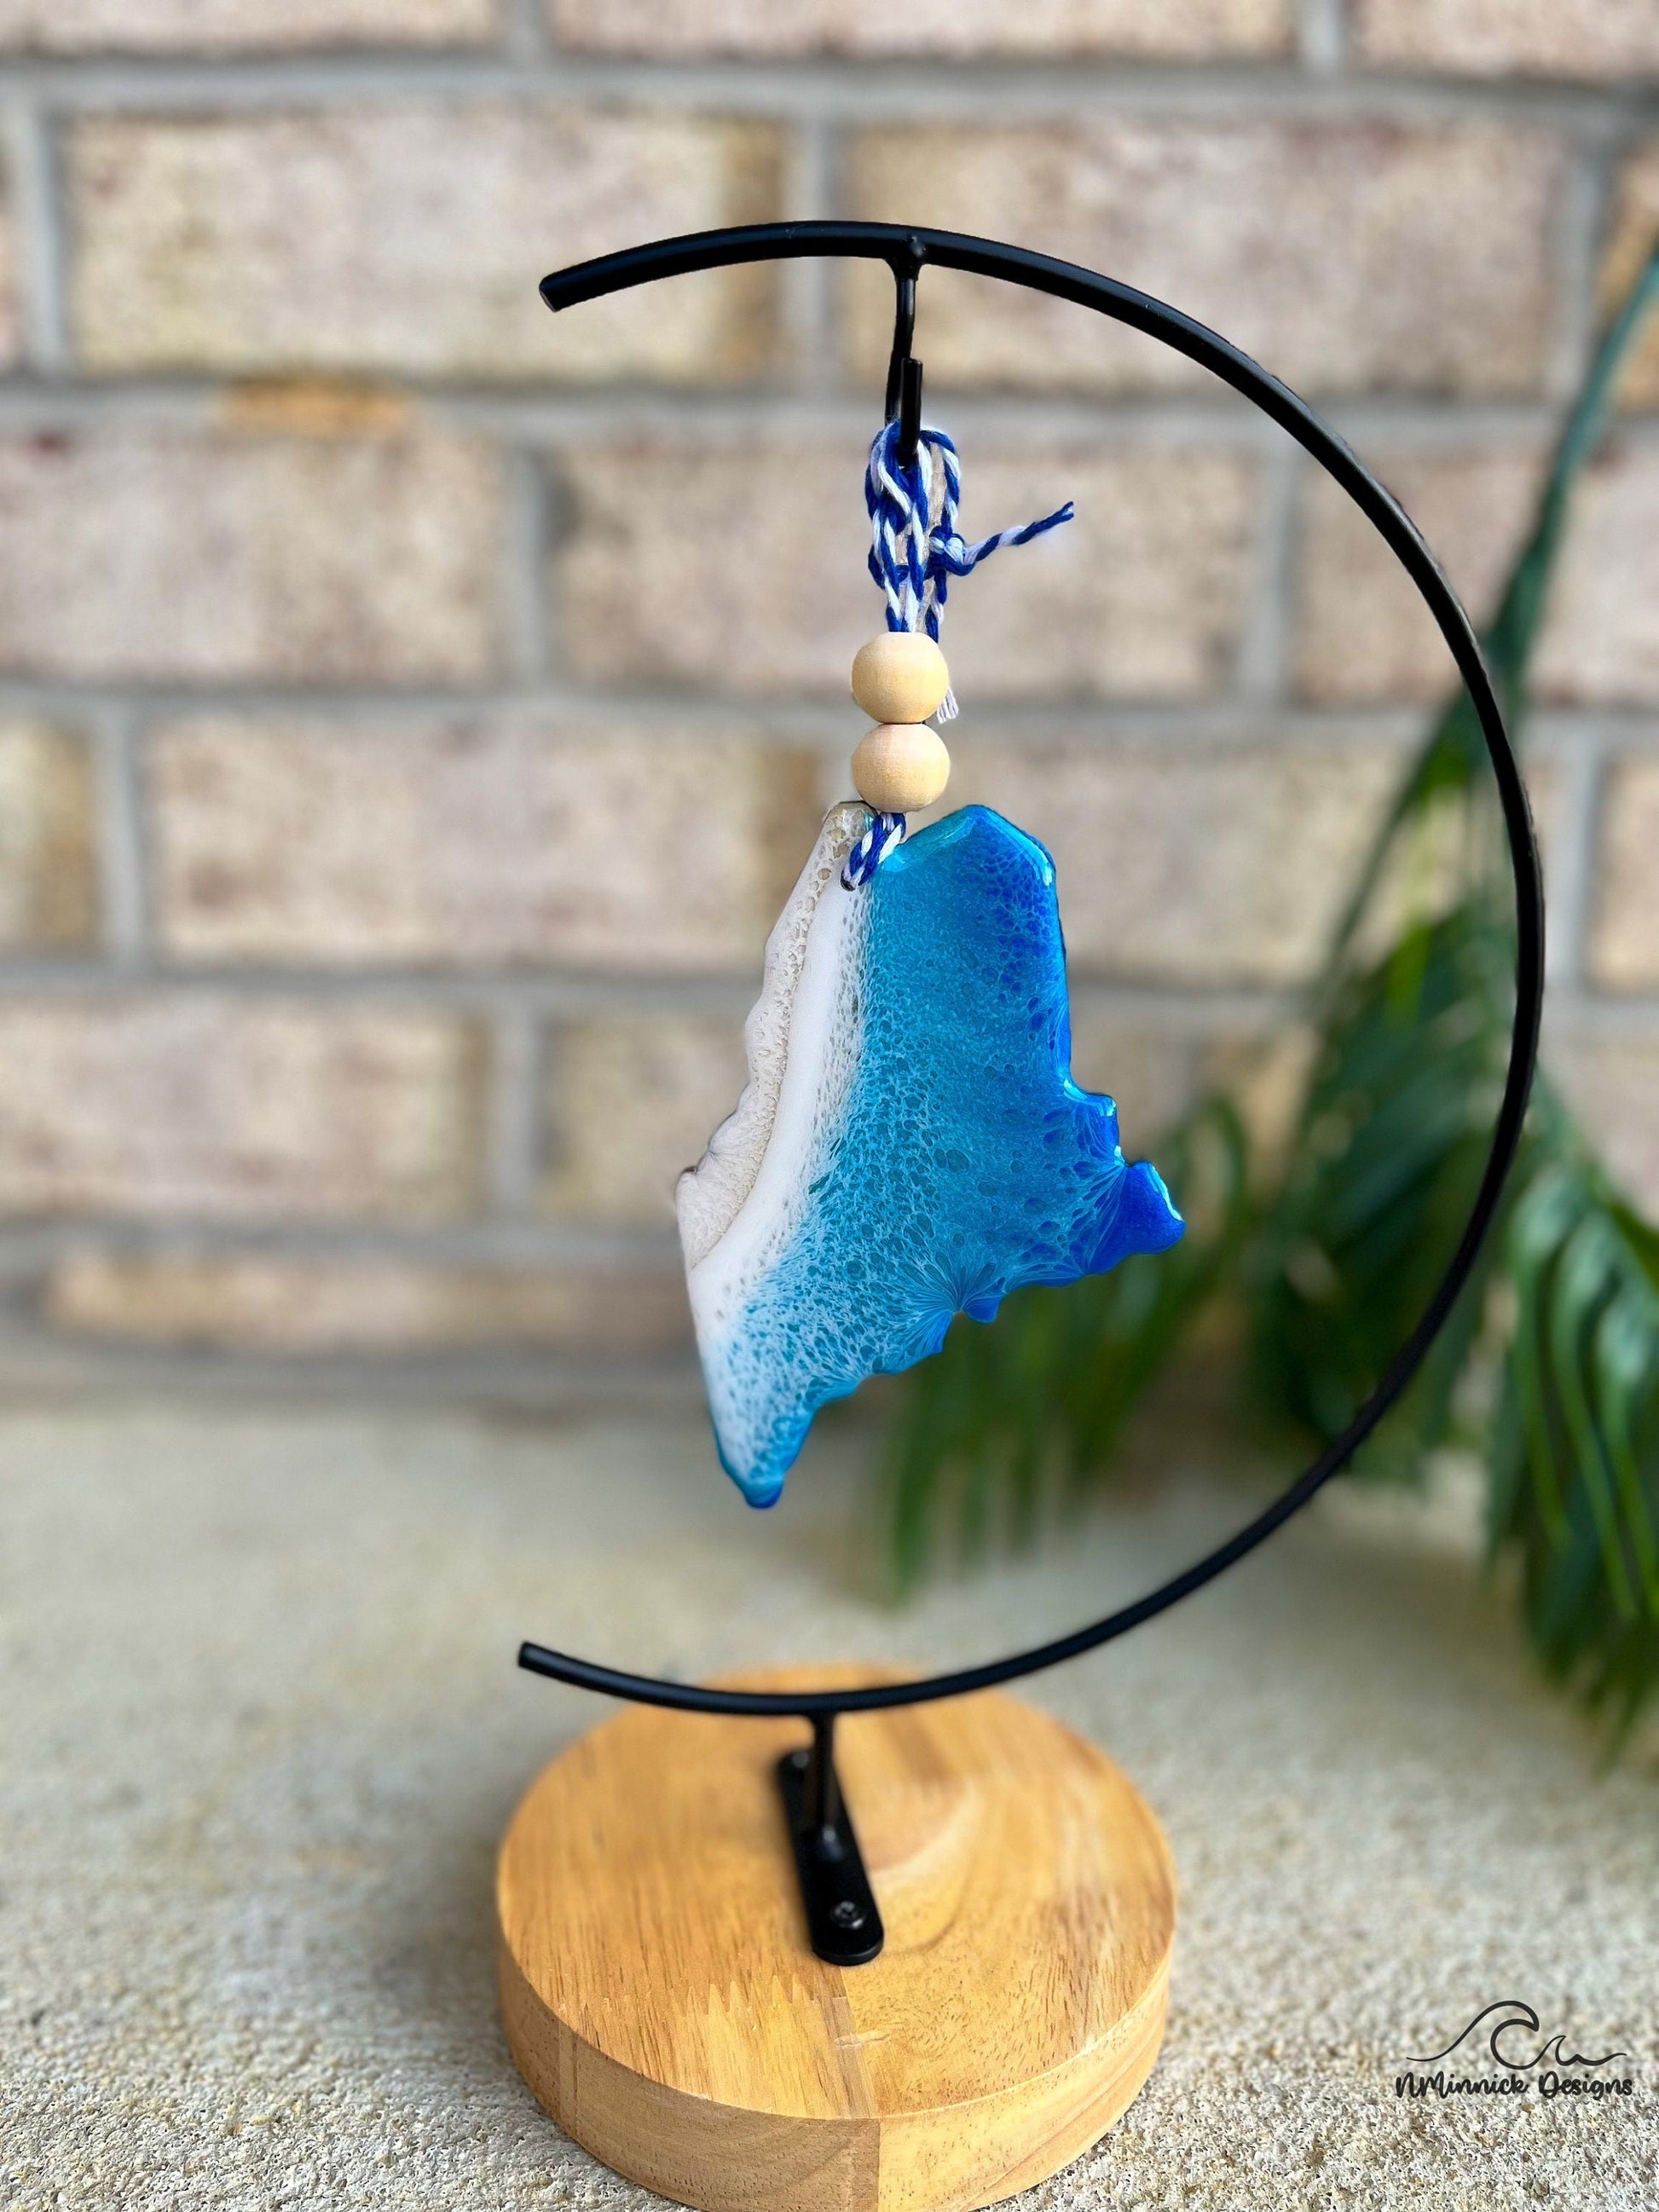 Maine ornament with ocean resin art hanging from an ornament stand.